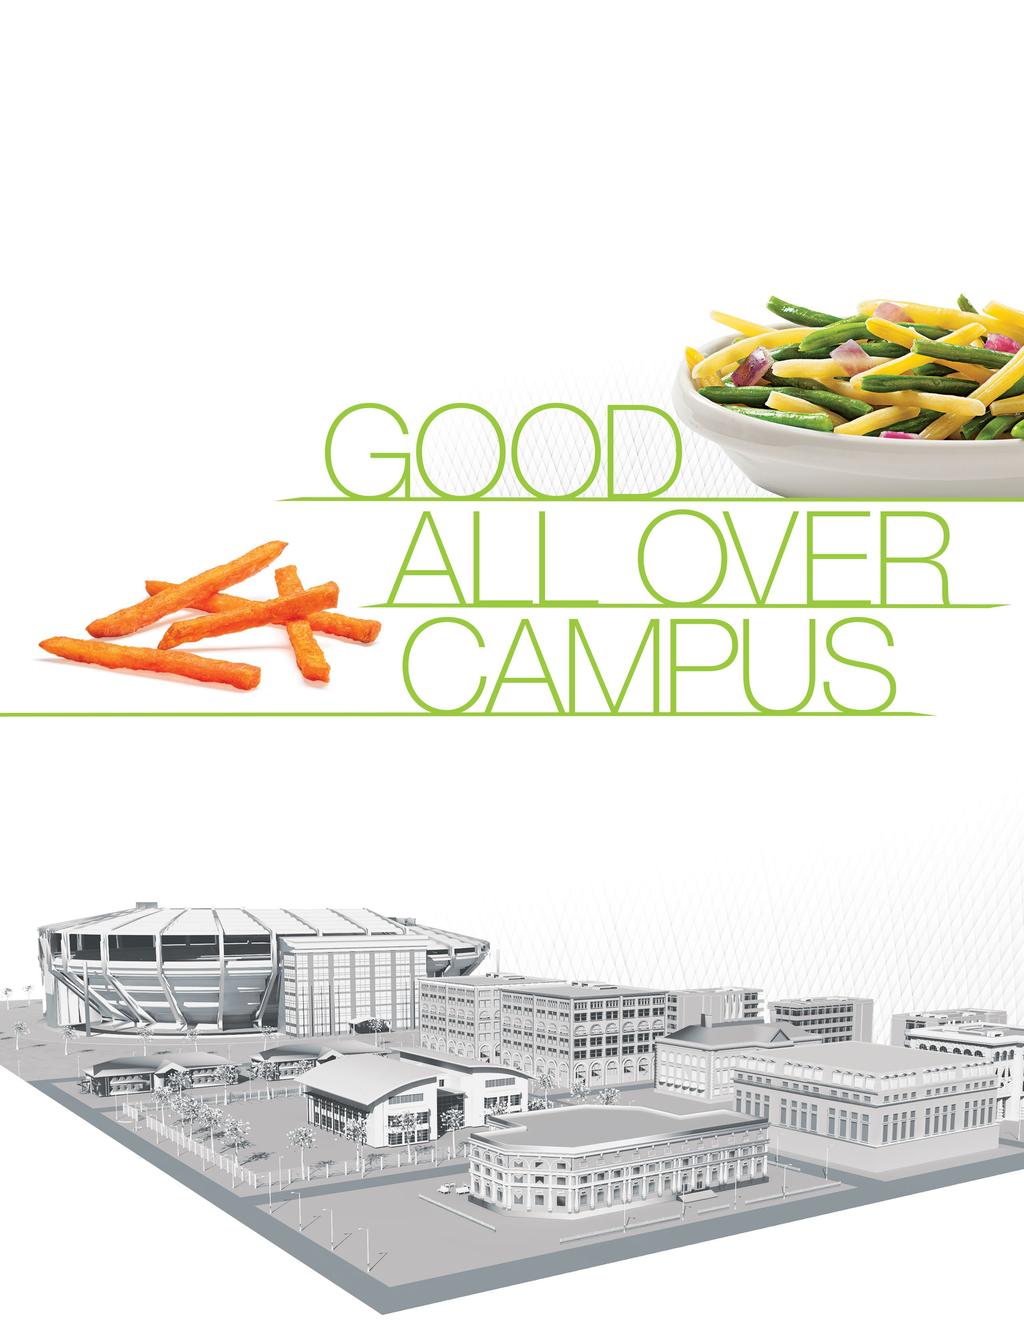 DINING HALL / STADIUM / STUDENT UNION / LIBRARY / CONVENIENCE STORE CATERING